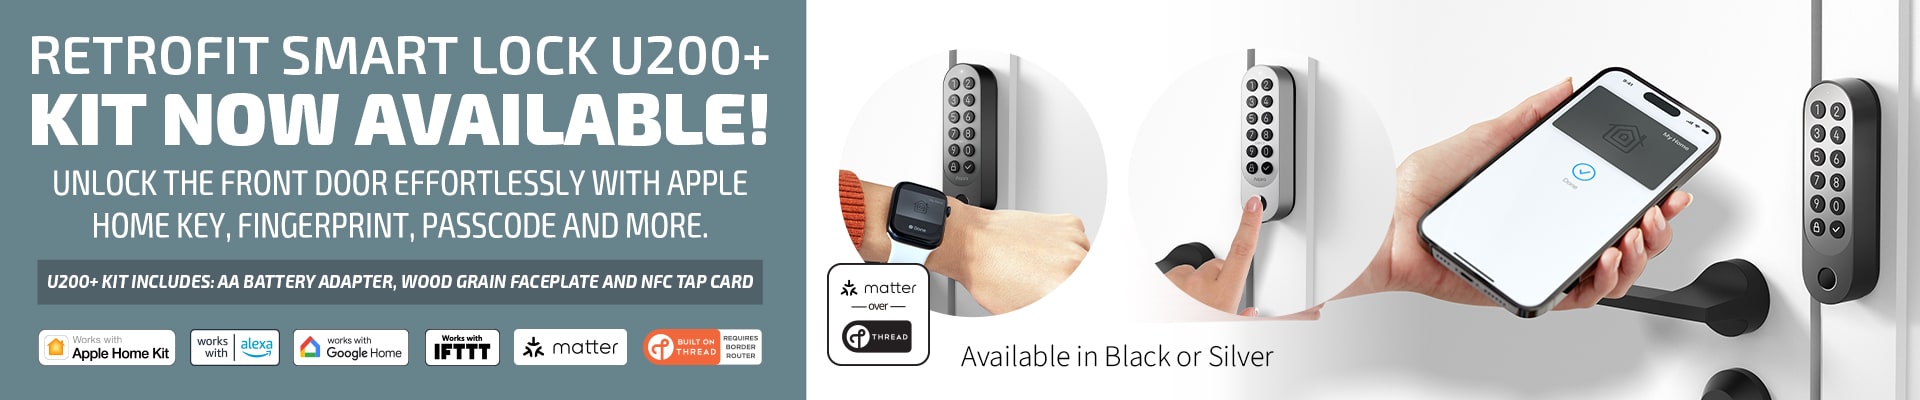 Aqara retrofit smart lock u200+ kit now available! 20% off! Use discount code "U200" at checkout. Unlock the front door effortlessly with Apple Home Key, Fingerprint, Passcode and more. U200+ kit includes: AA battery adapter, wood grain faceplate and NFC tap card.